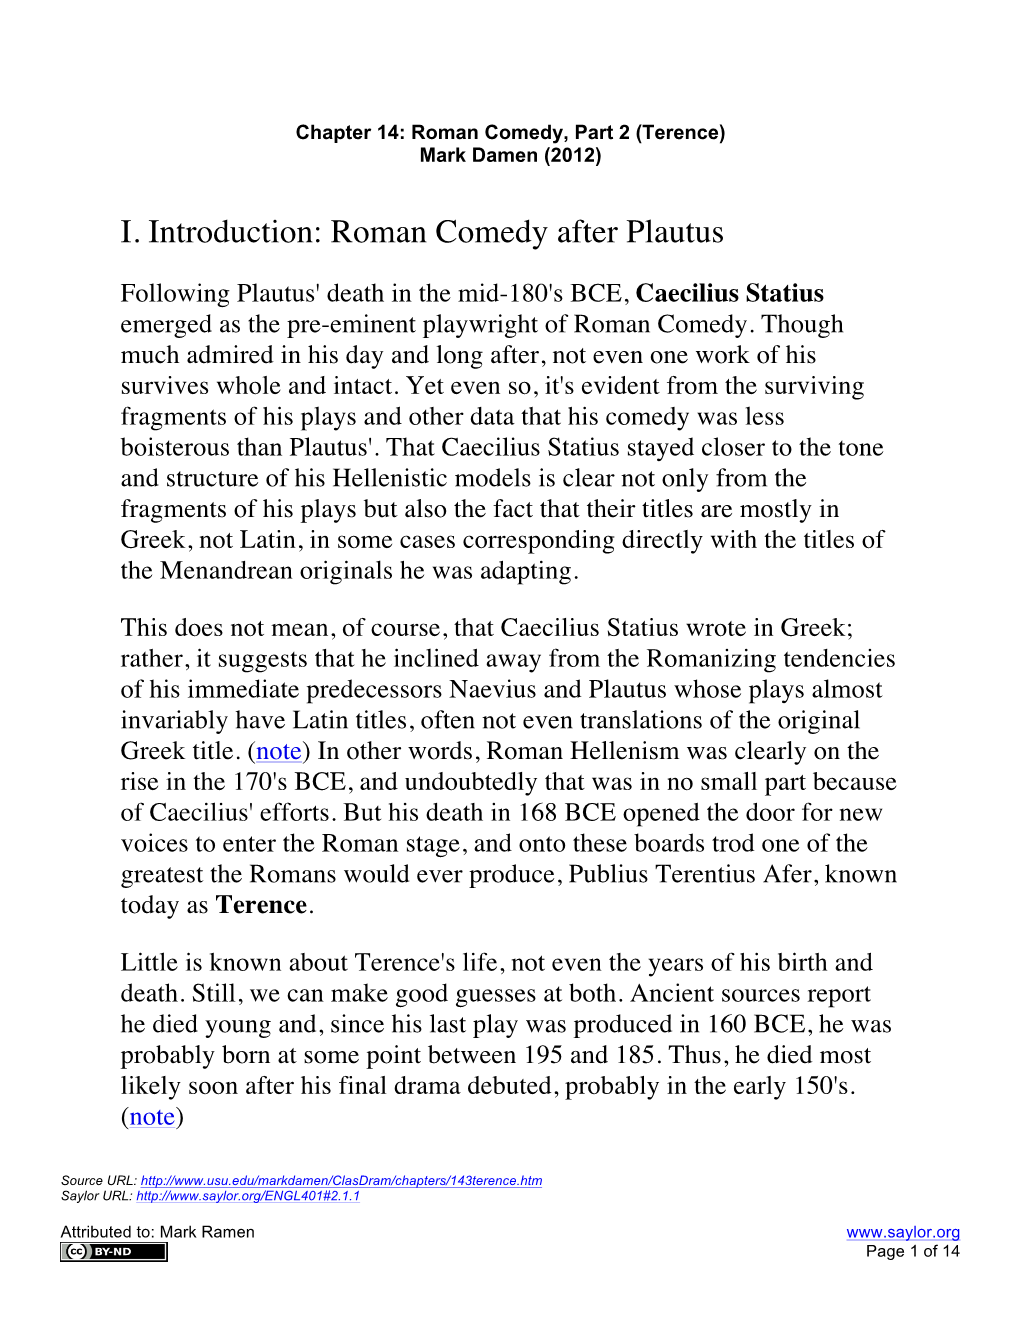 Following Plautus' Death in the Mid-180'S BCE, Caecilius Statius Emerged As the Pre-Eminent Playwright of Roman Comedy